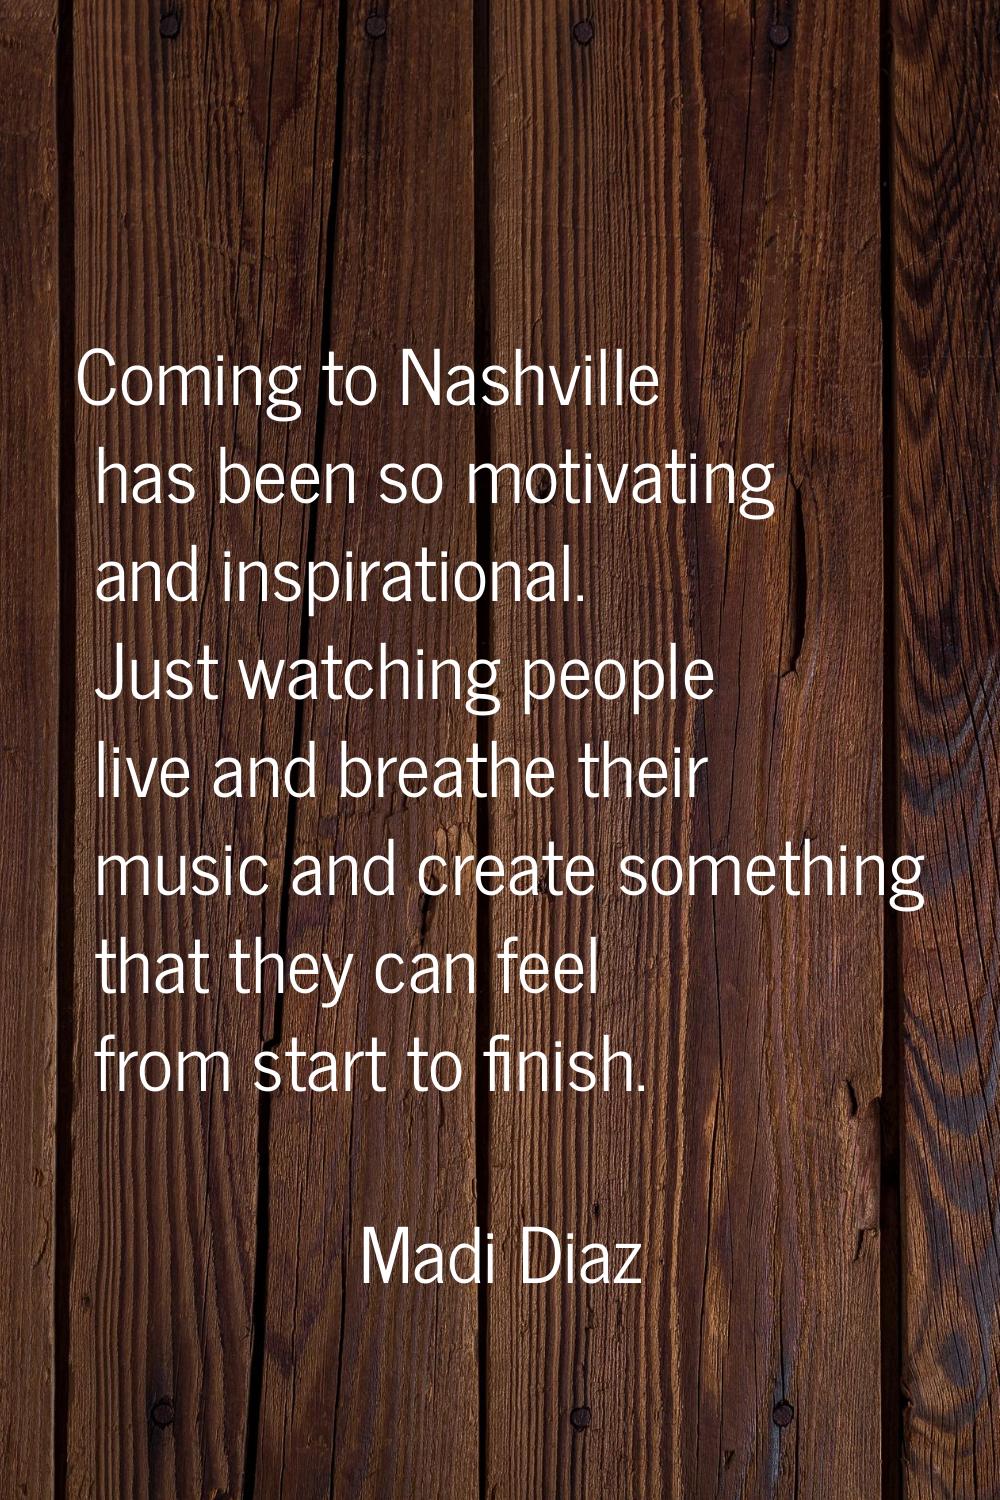 Coming to Nashville has been so motivating and inspirational. Just watching people live and breathe